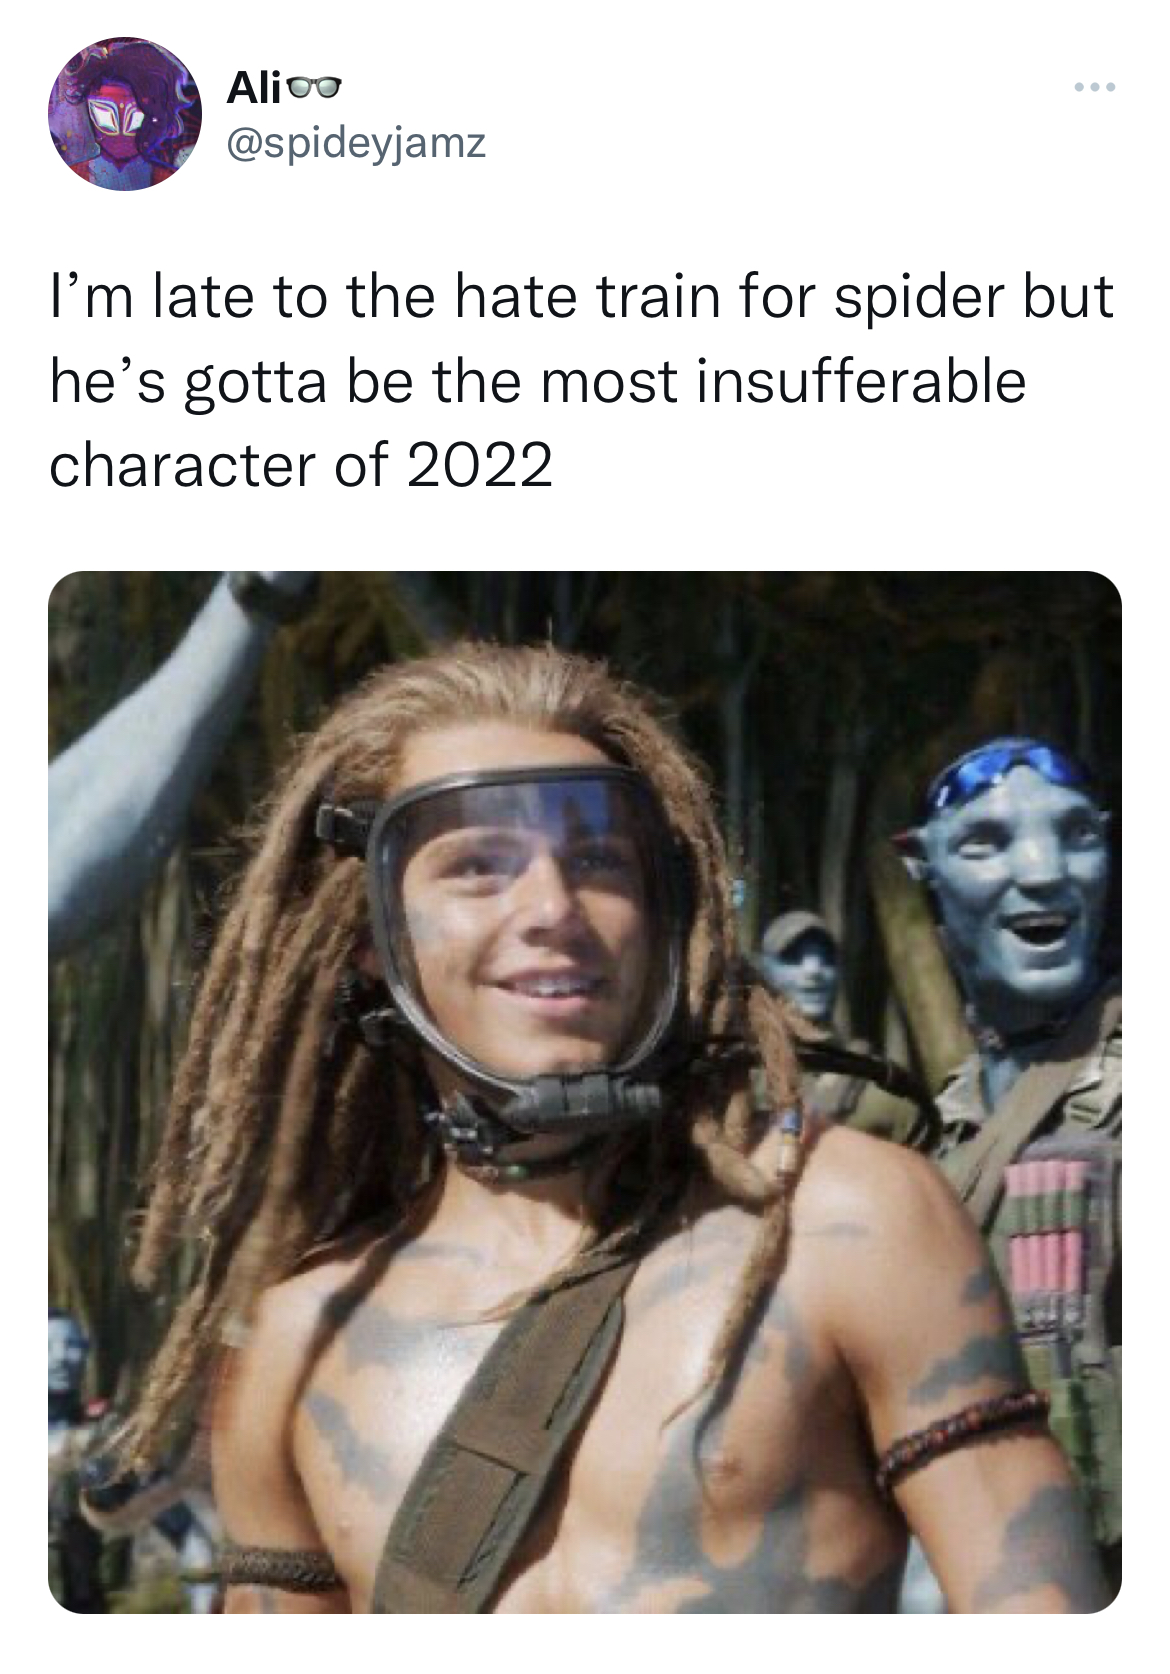 Tweets dunking on celebs - avatar 2 cast - Alico I'm late to the hate train for spider but he's gotta be the most insufferable character of 2022